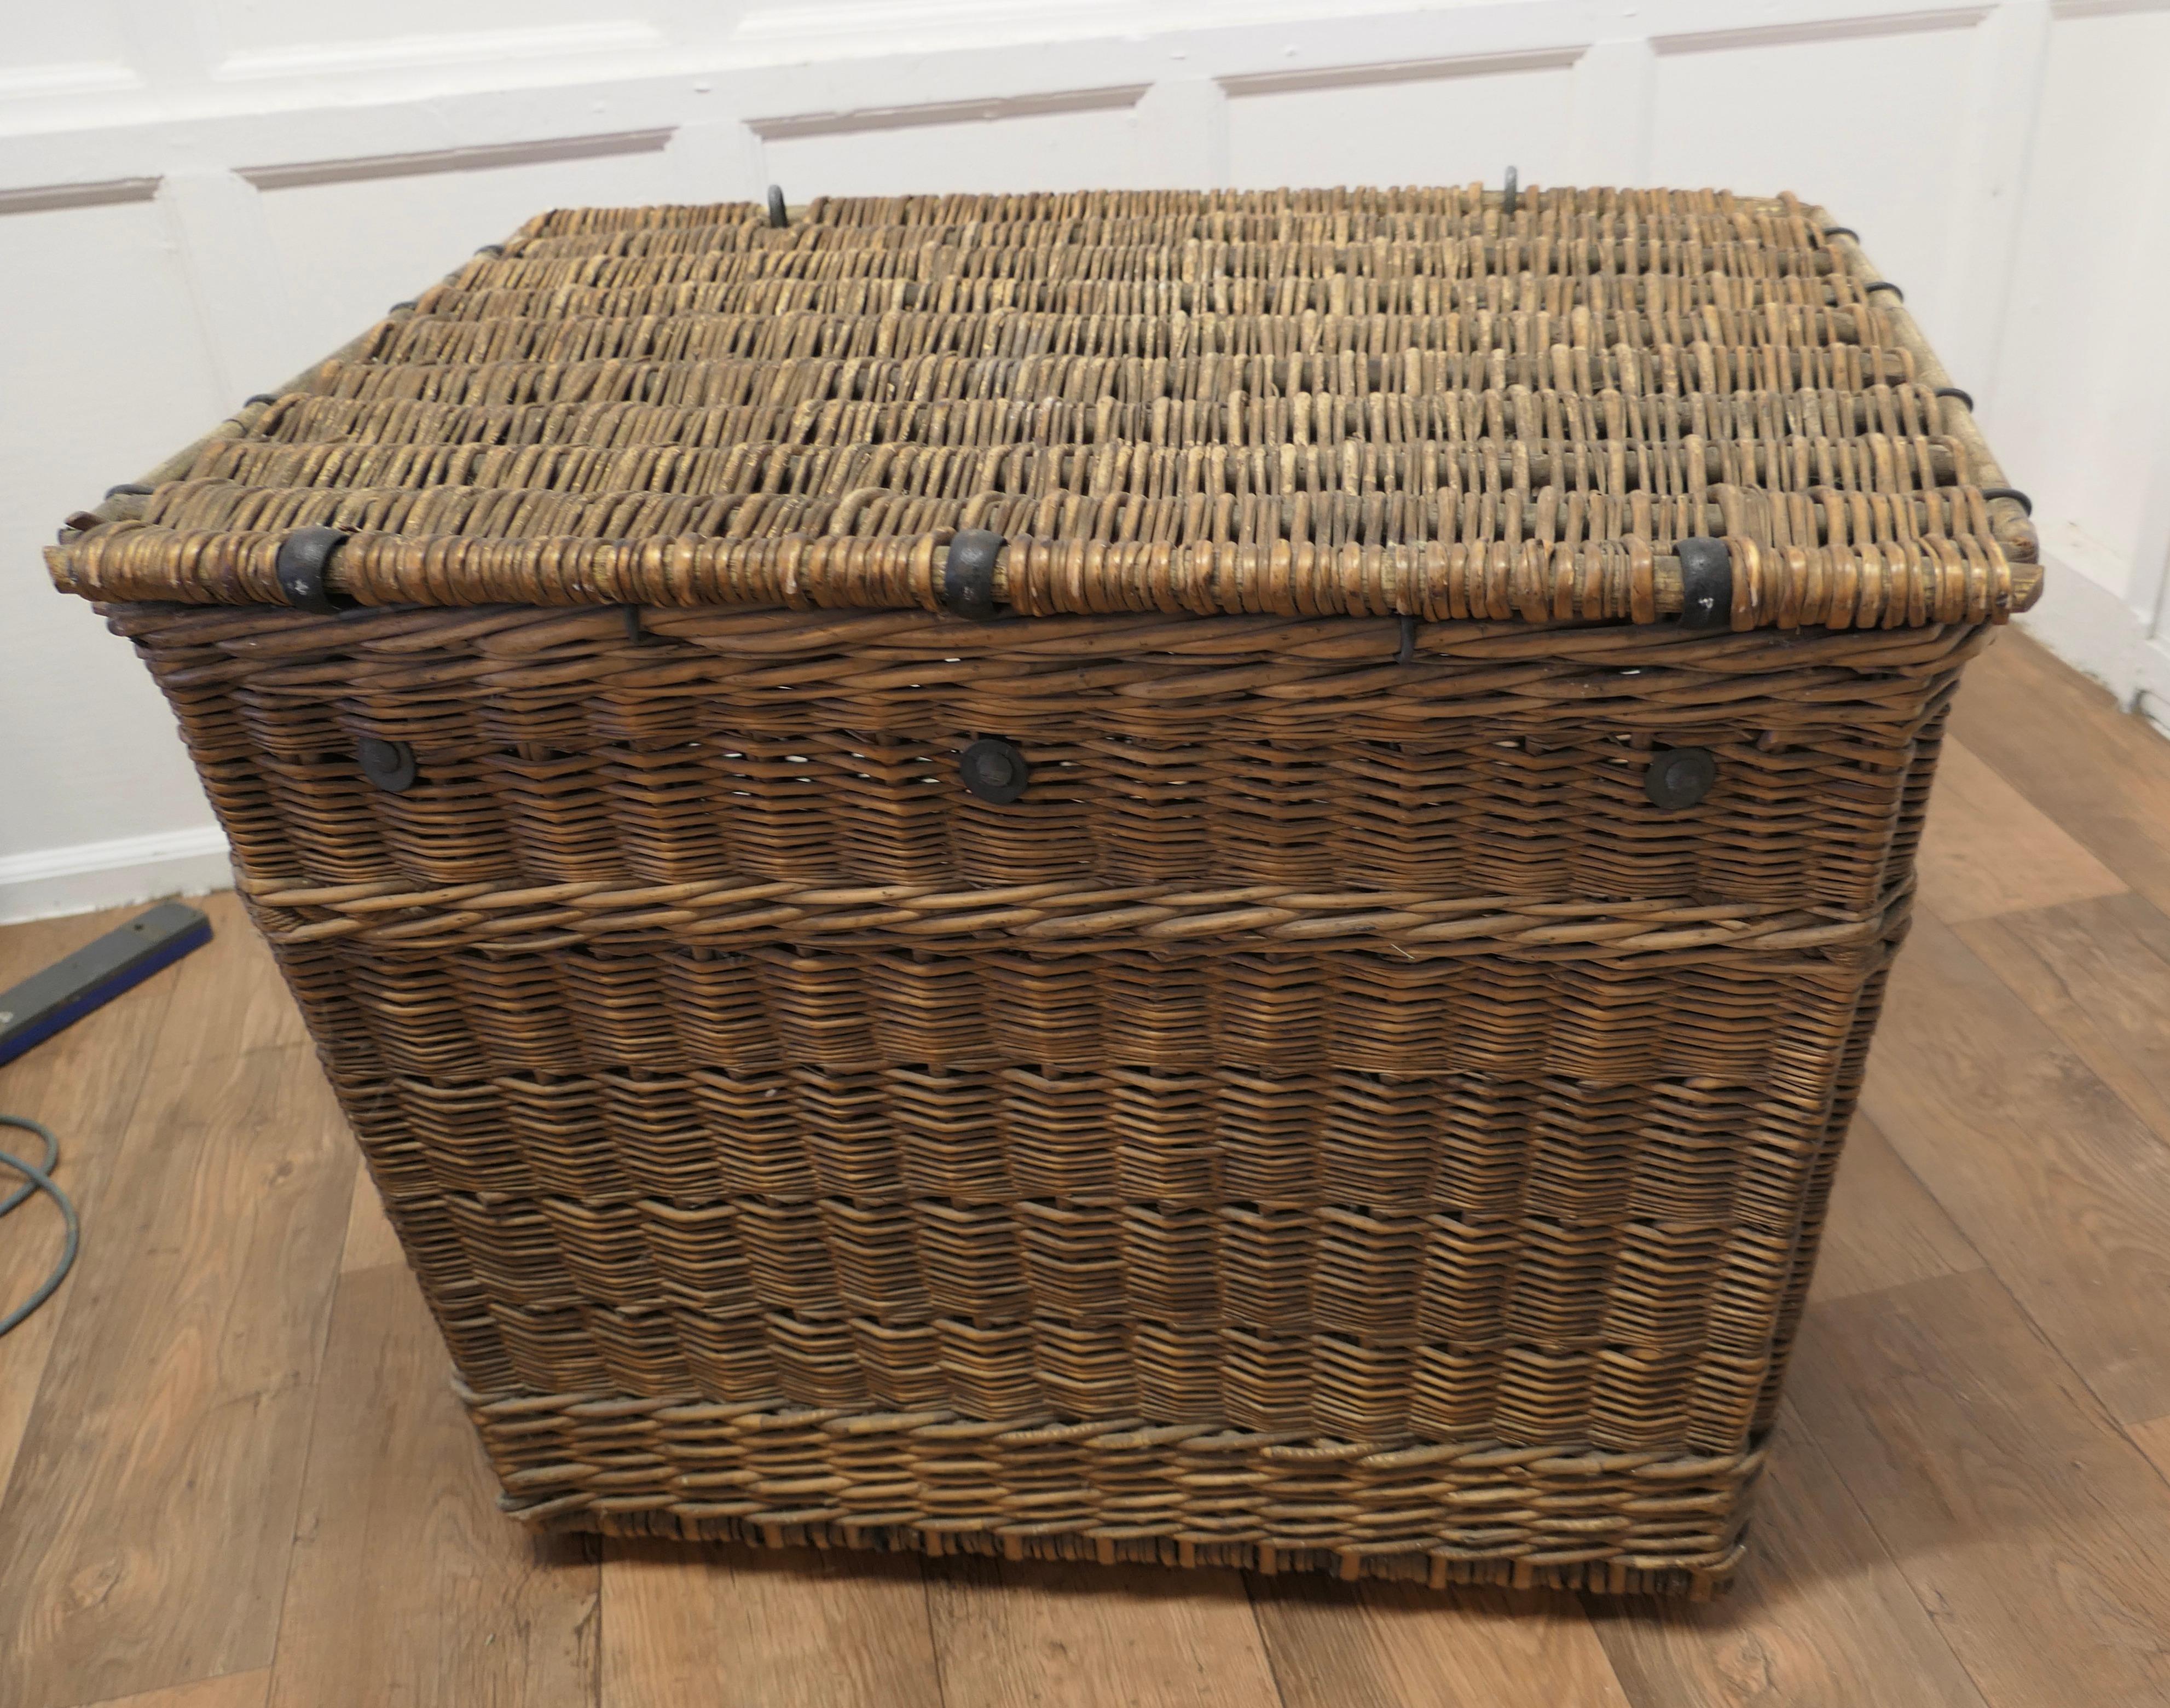 Early 20th Century Large Victorian Antique Wicker Laundry Basket.   